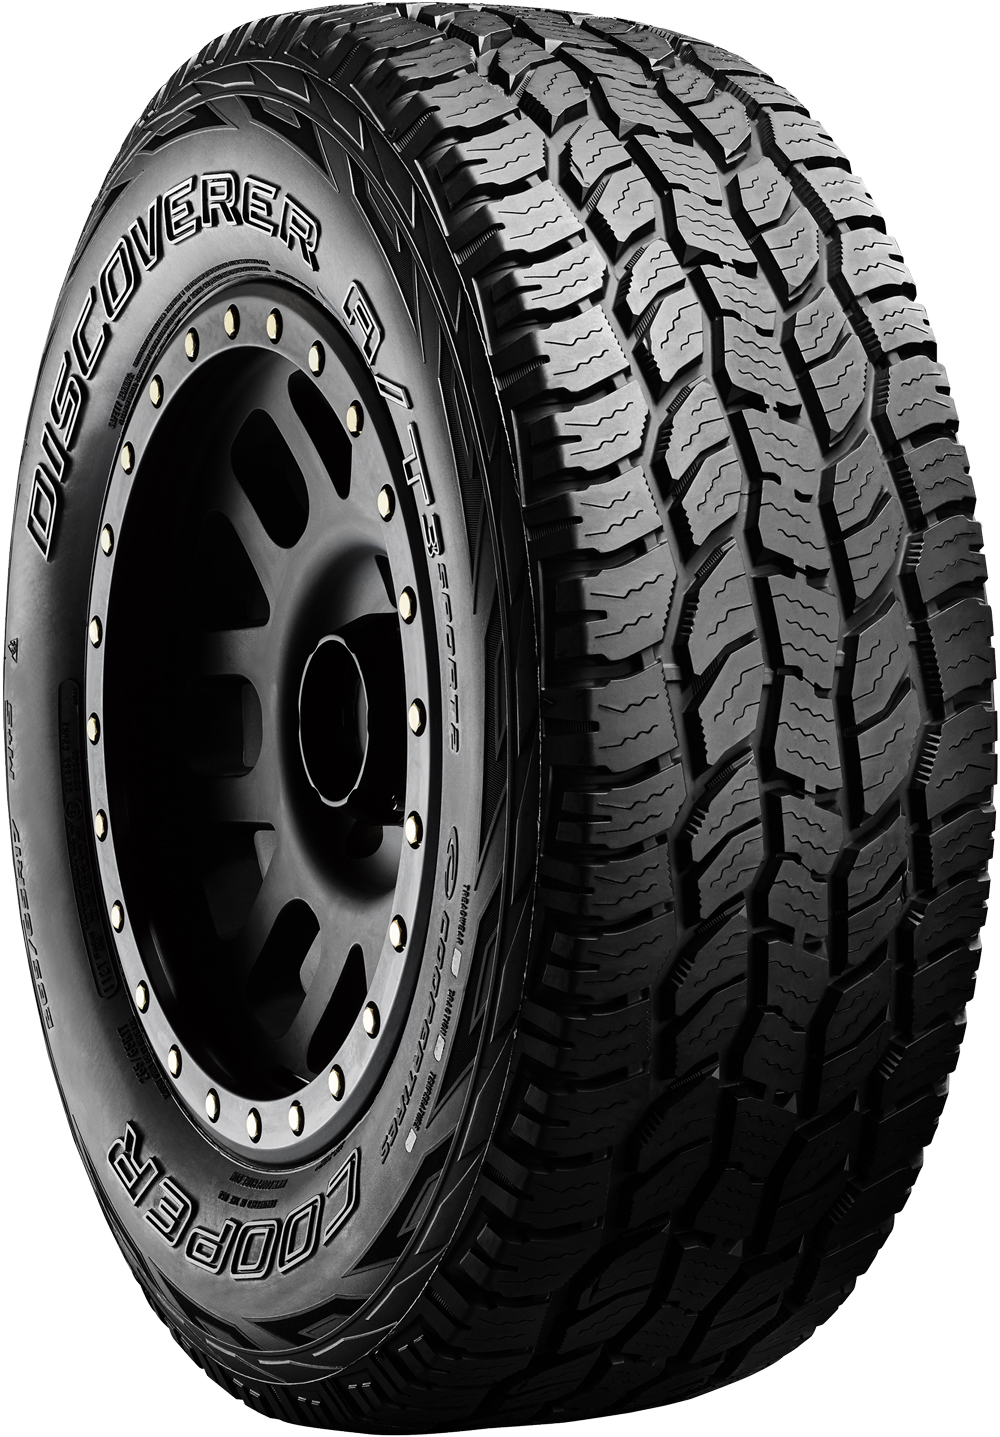 Anvelope jeep COOPER DISCOVERER A/T3 SPORT 2 BSW 205/80 R16 110S